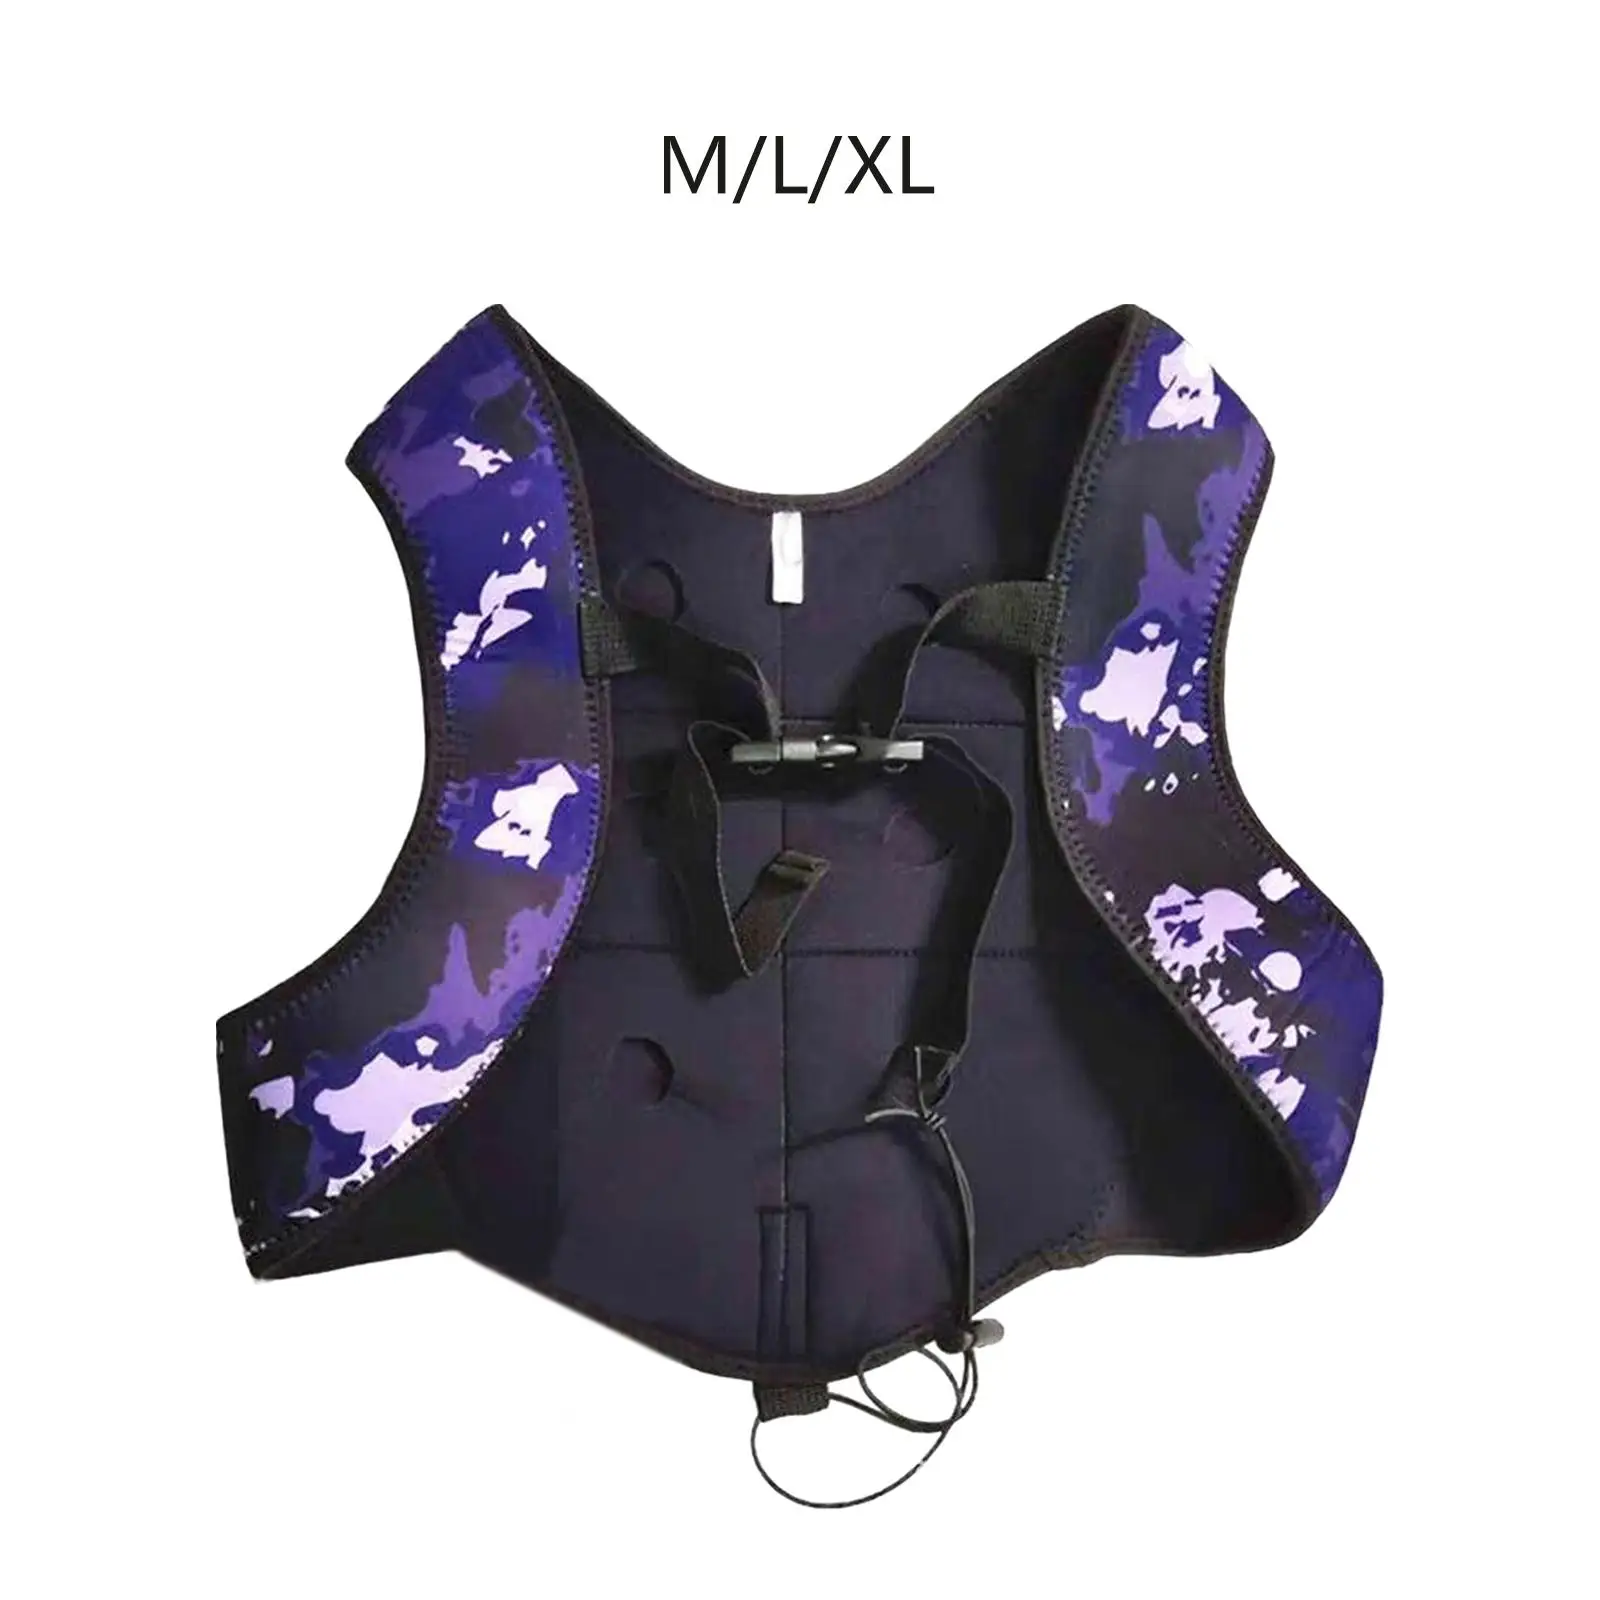 Multifunction Diving Weight Vest Underwater Hunting Snorkeling with 6 Drop